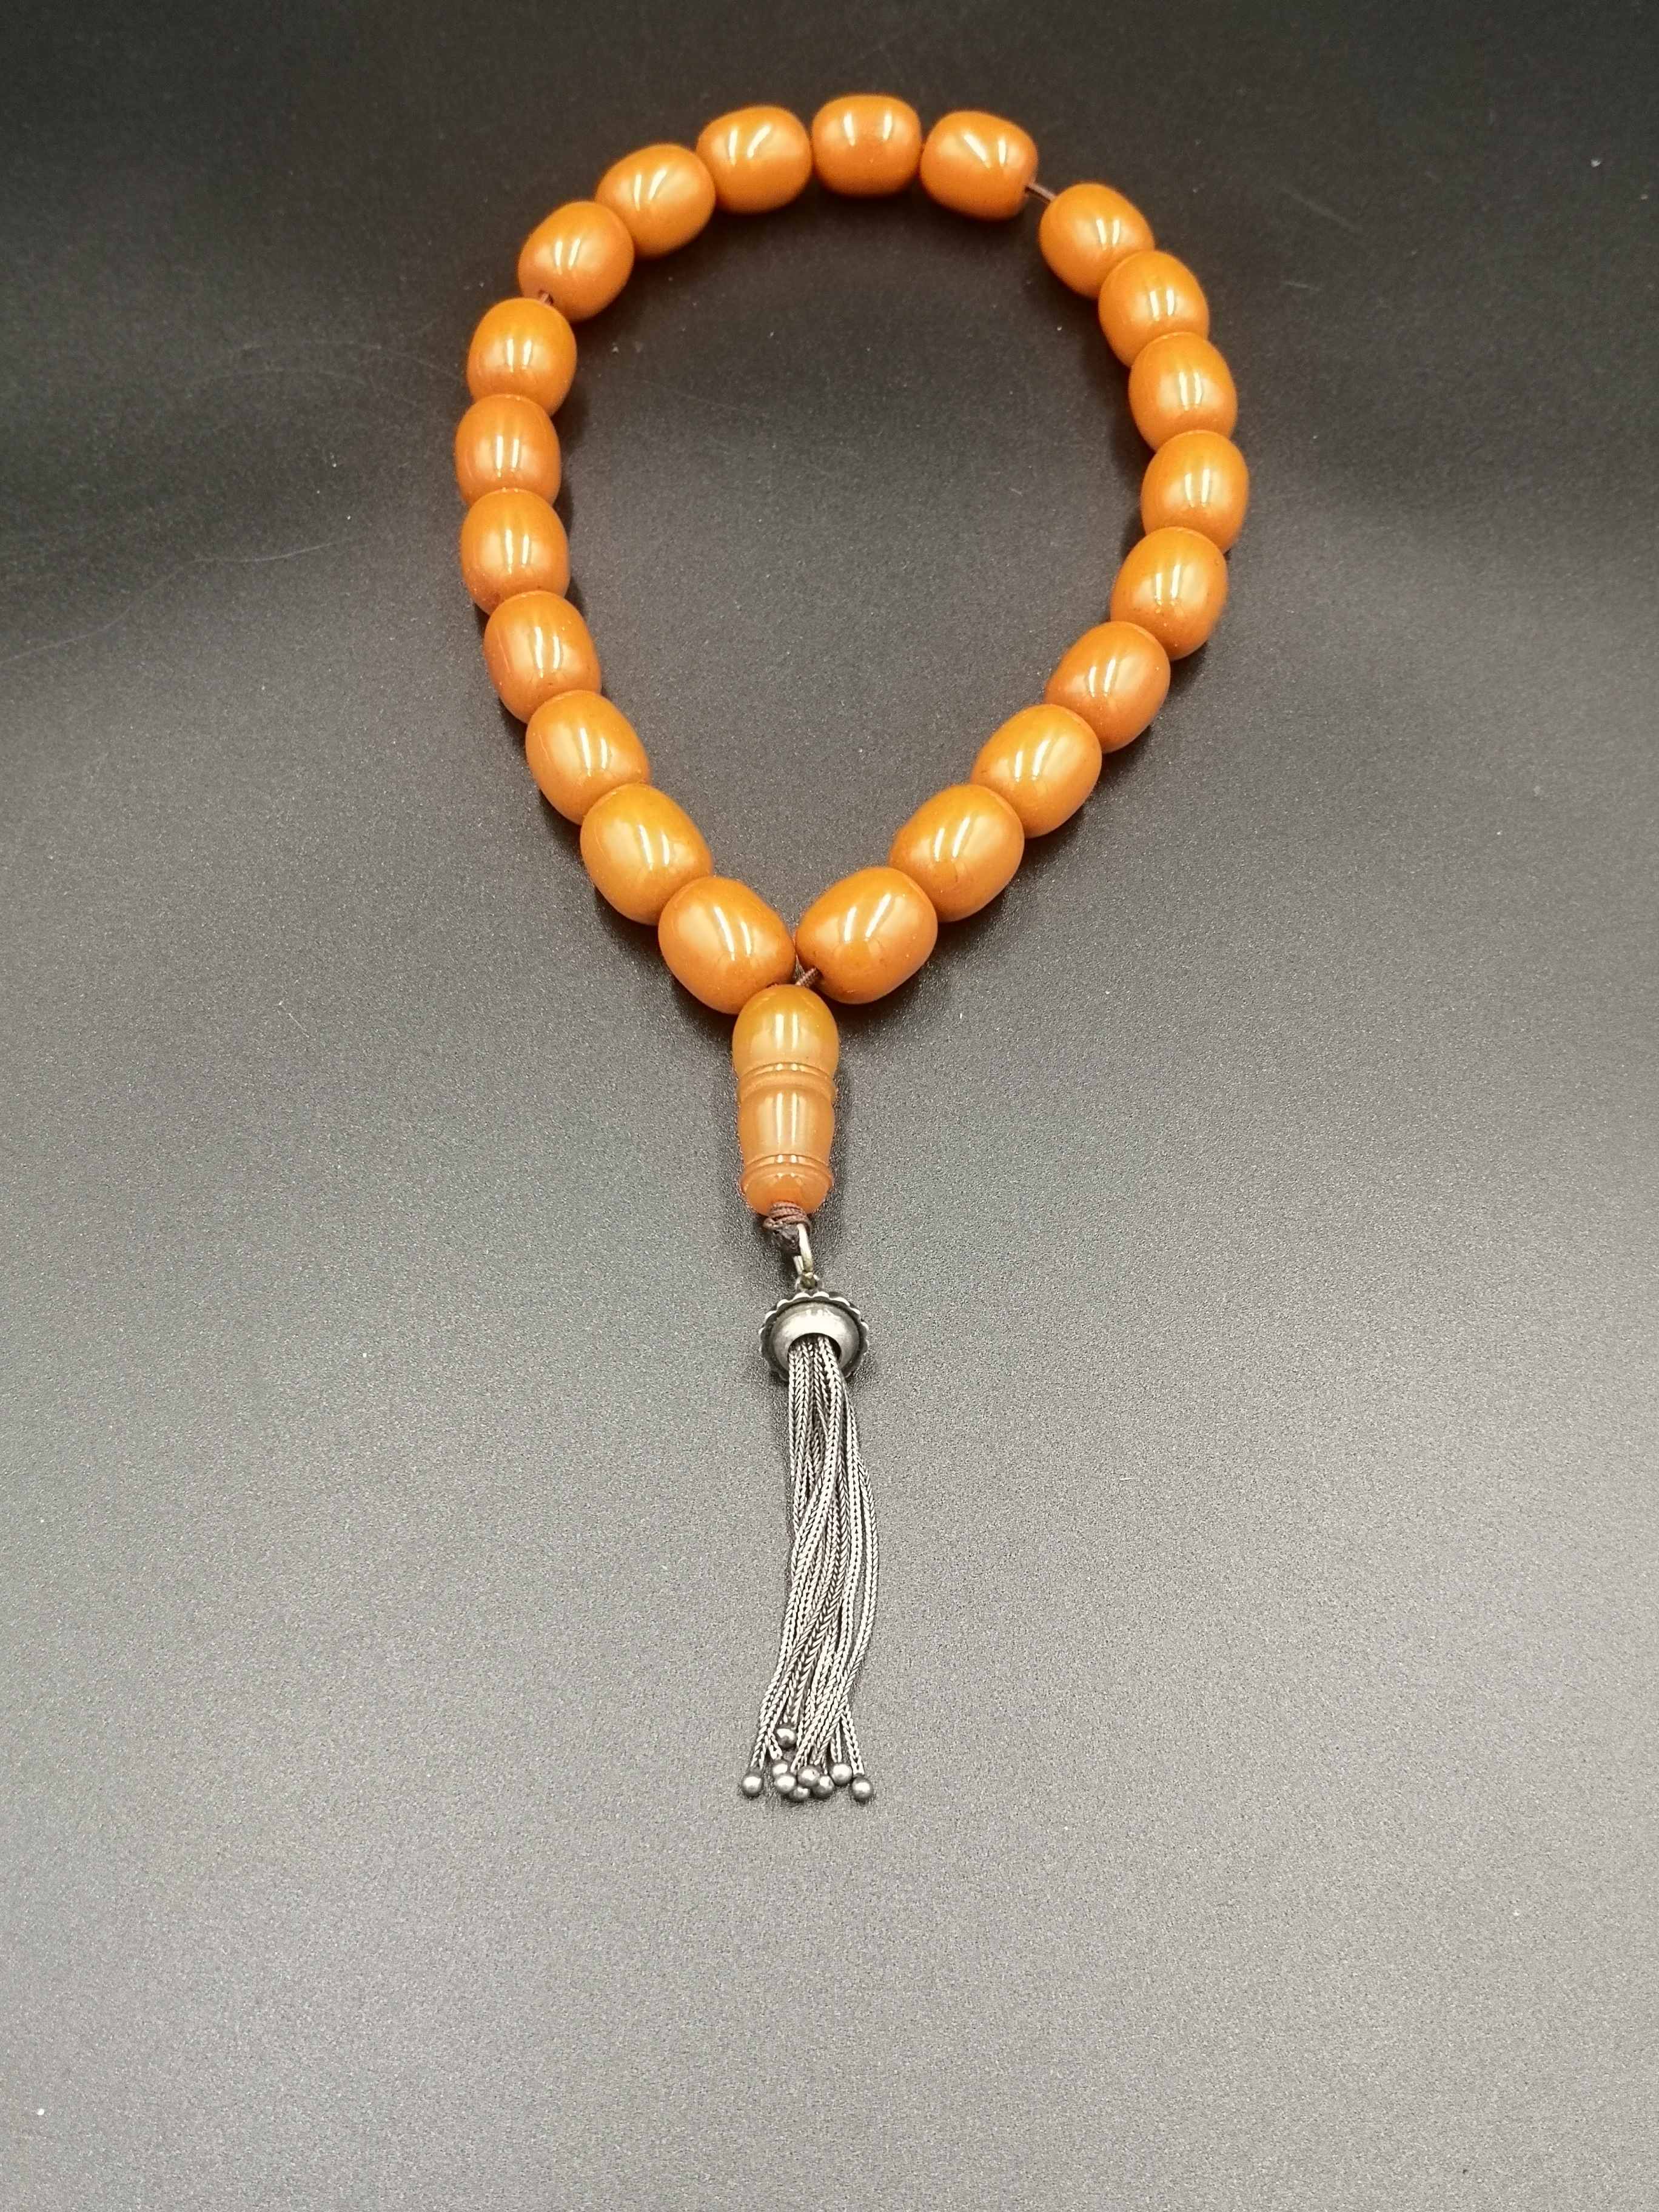 Formed natural butterscotch worry beads - Image 4 of 4